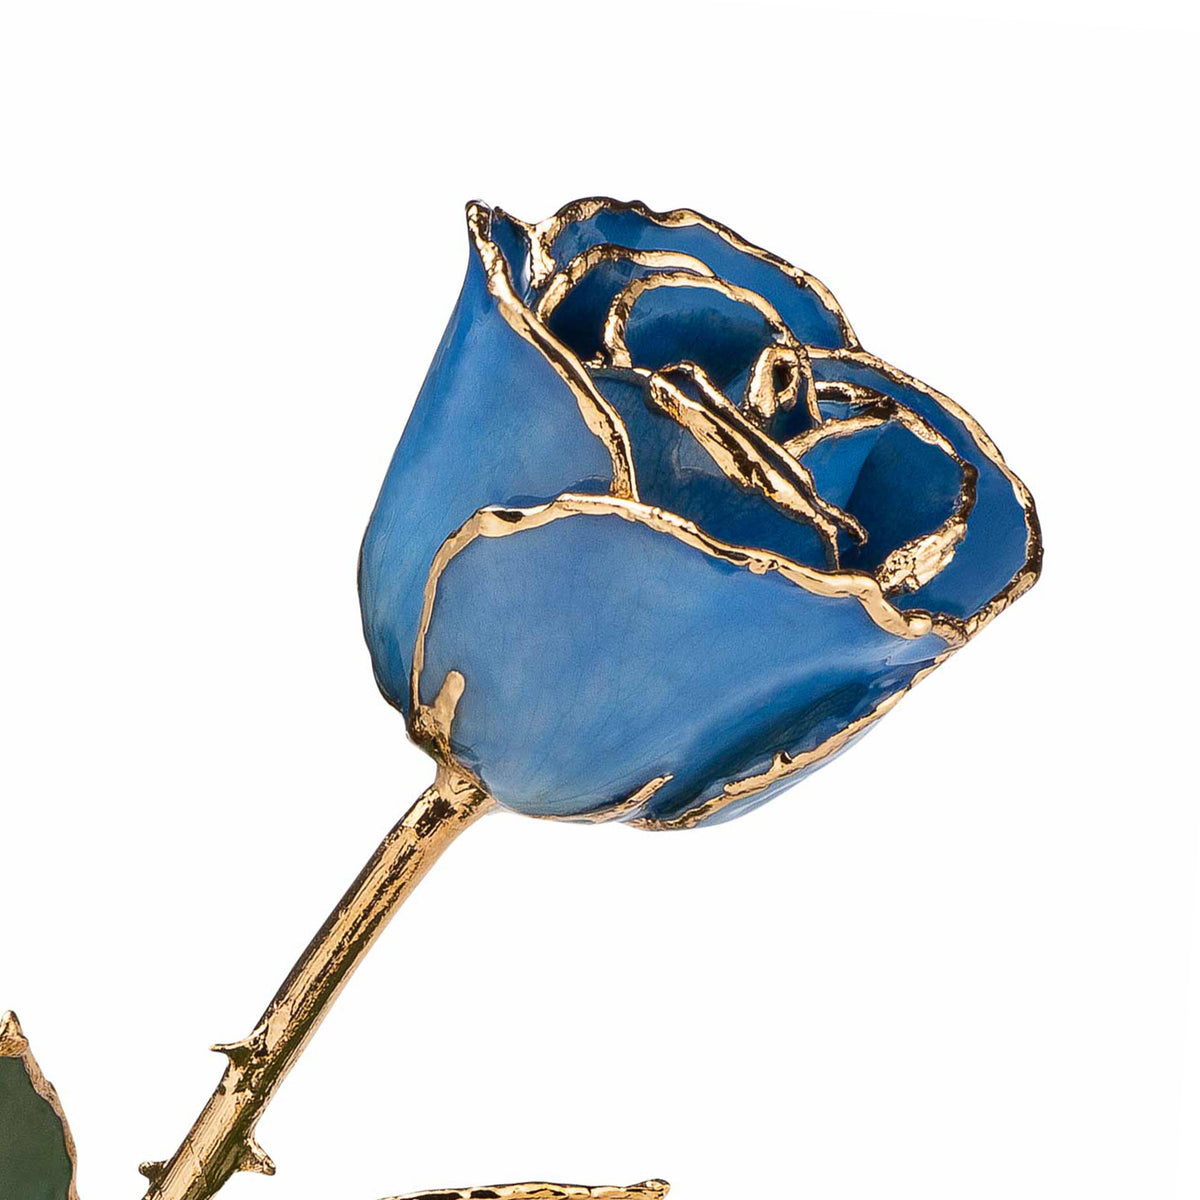 24K Gold Trimmed Forever Rose with Blue Petals with View of Stem, Leaves, and Rose Petals and Showing Detail of Gold Trim